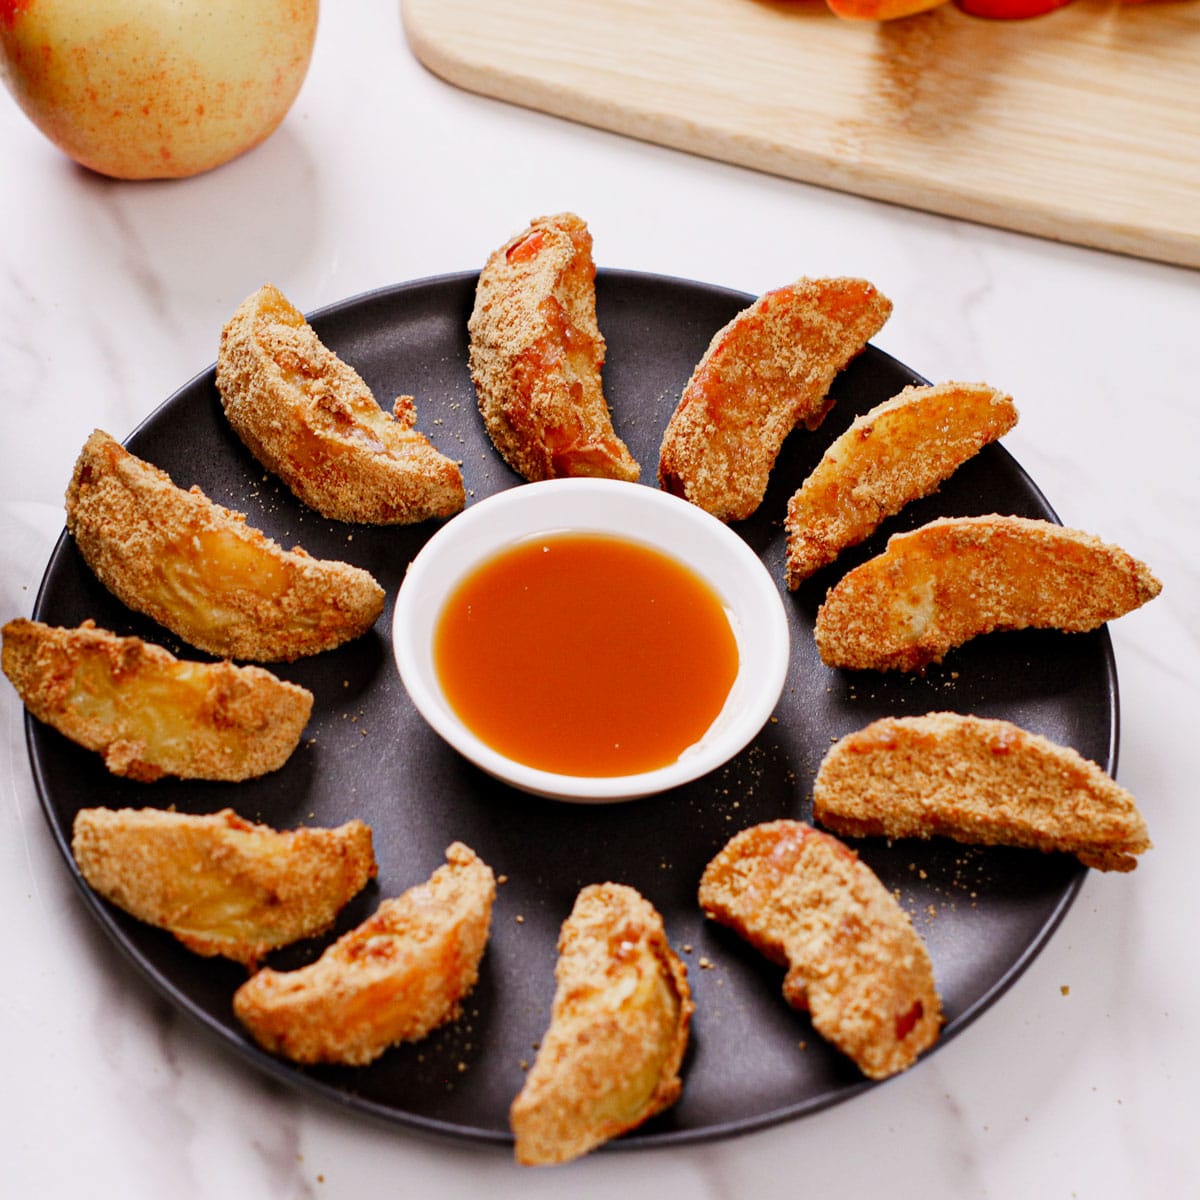 Air fried apple wedges served with caramel dipping sauce